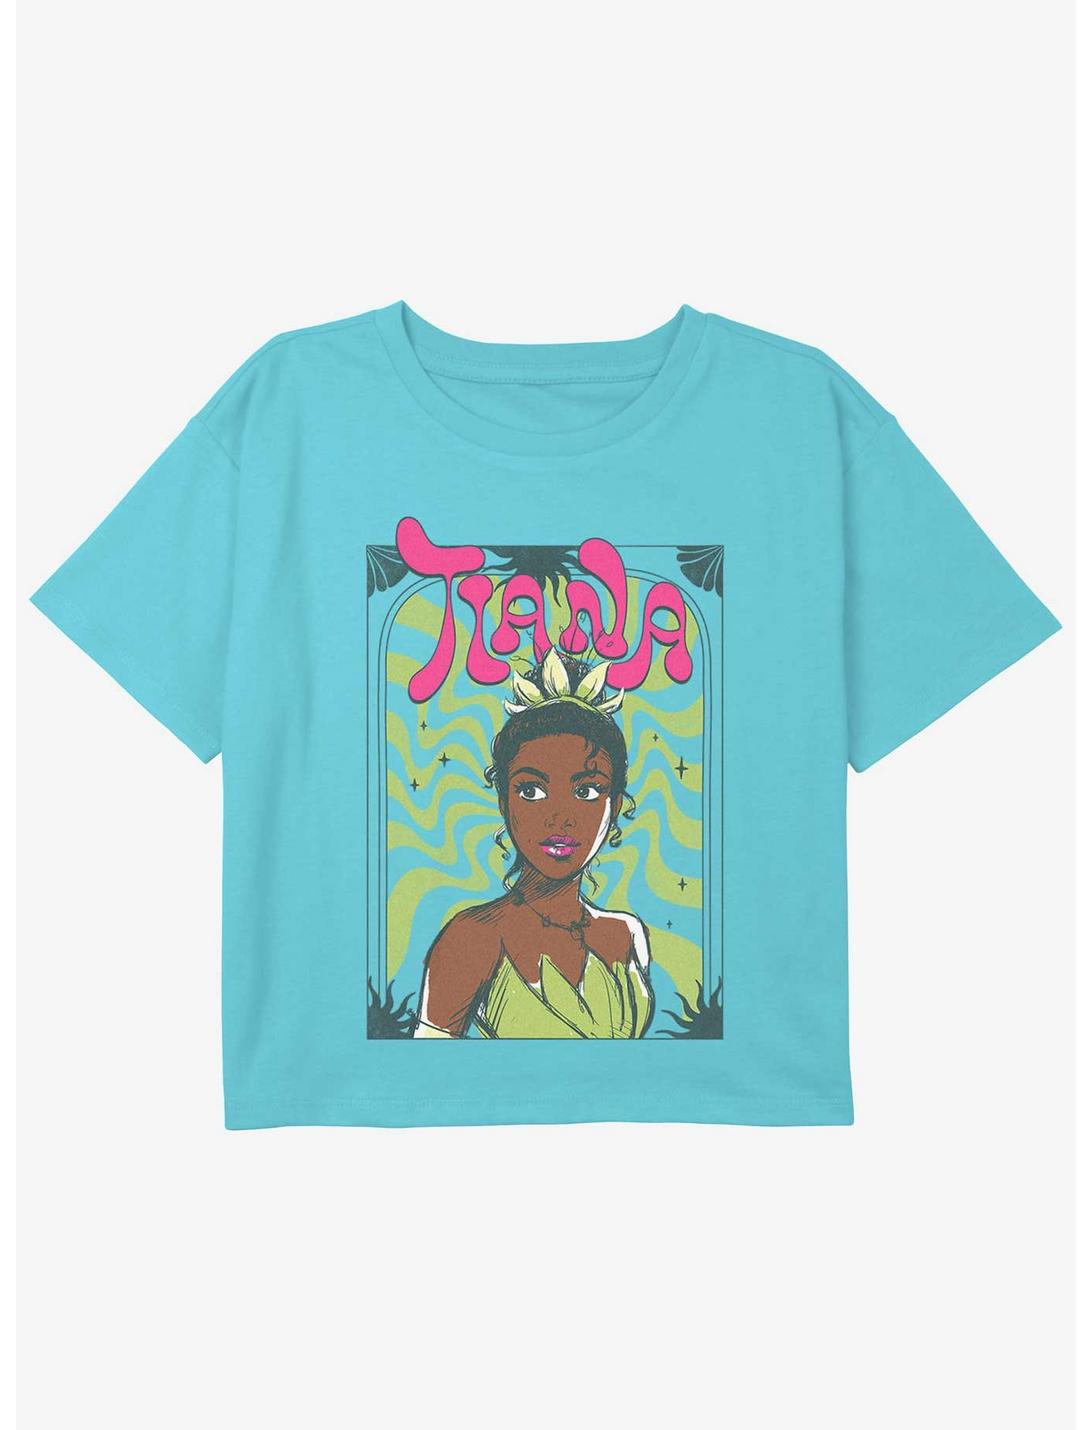 Disney The Princess and the Frog Groovy Tiana Girls Youth Crop T-Shirt, BLUE, hi-res